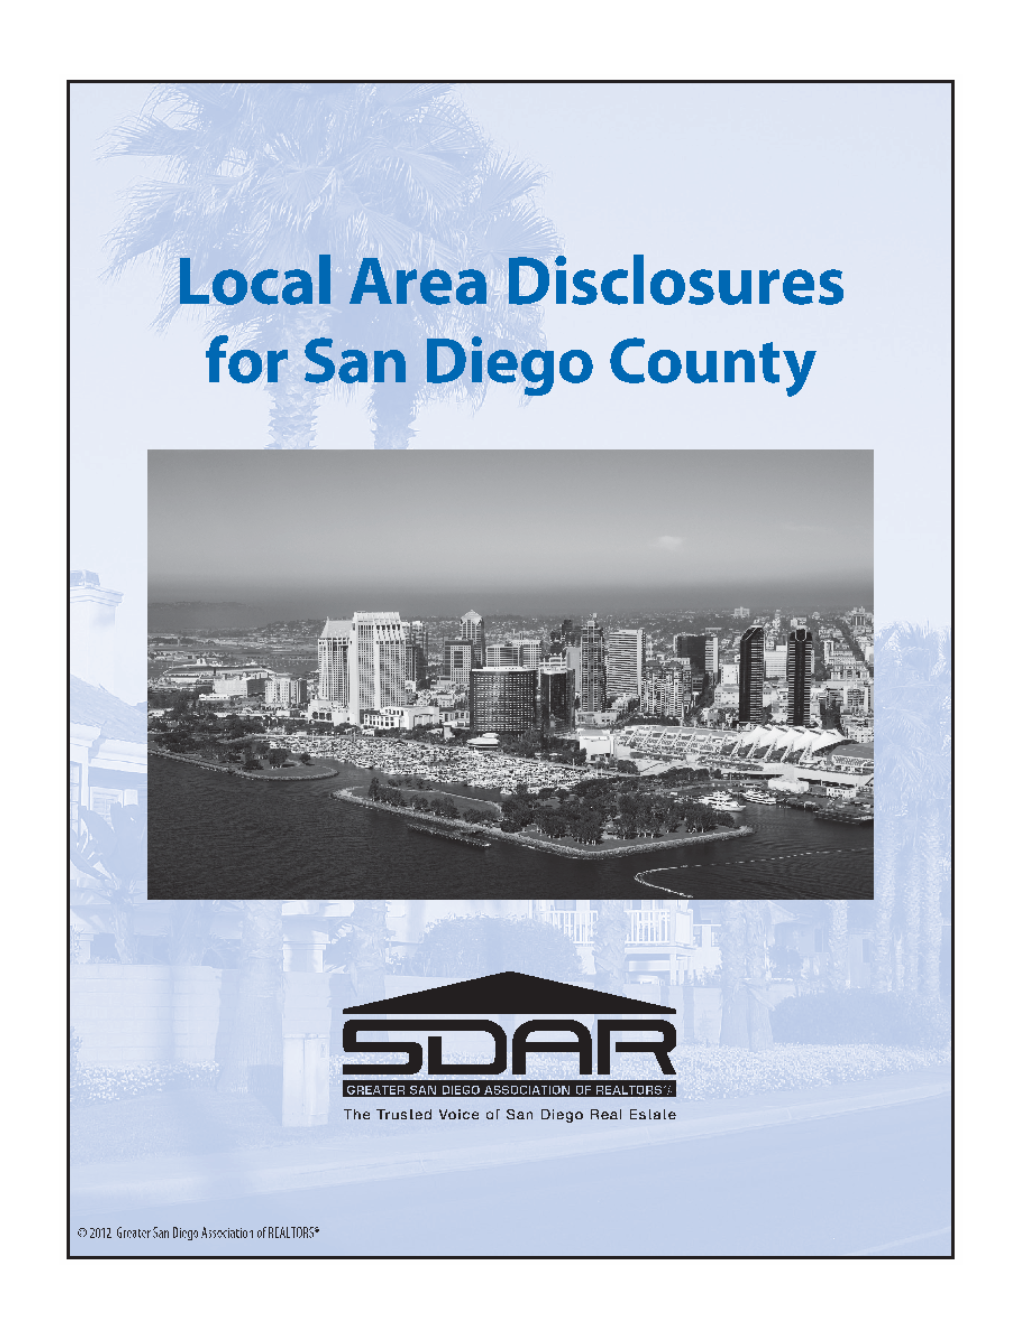 Local Area Disclosures for San Diego County